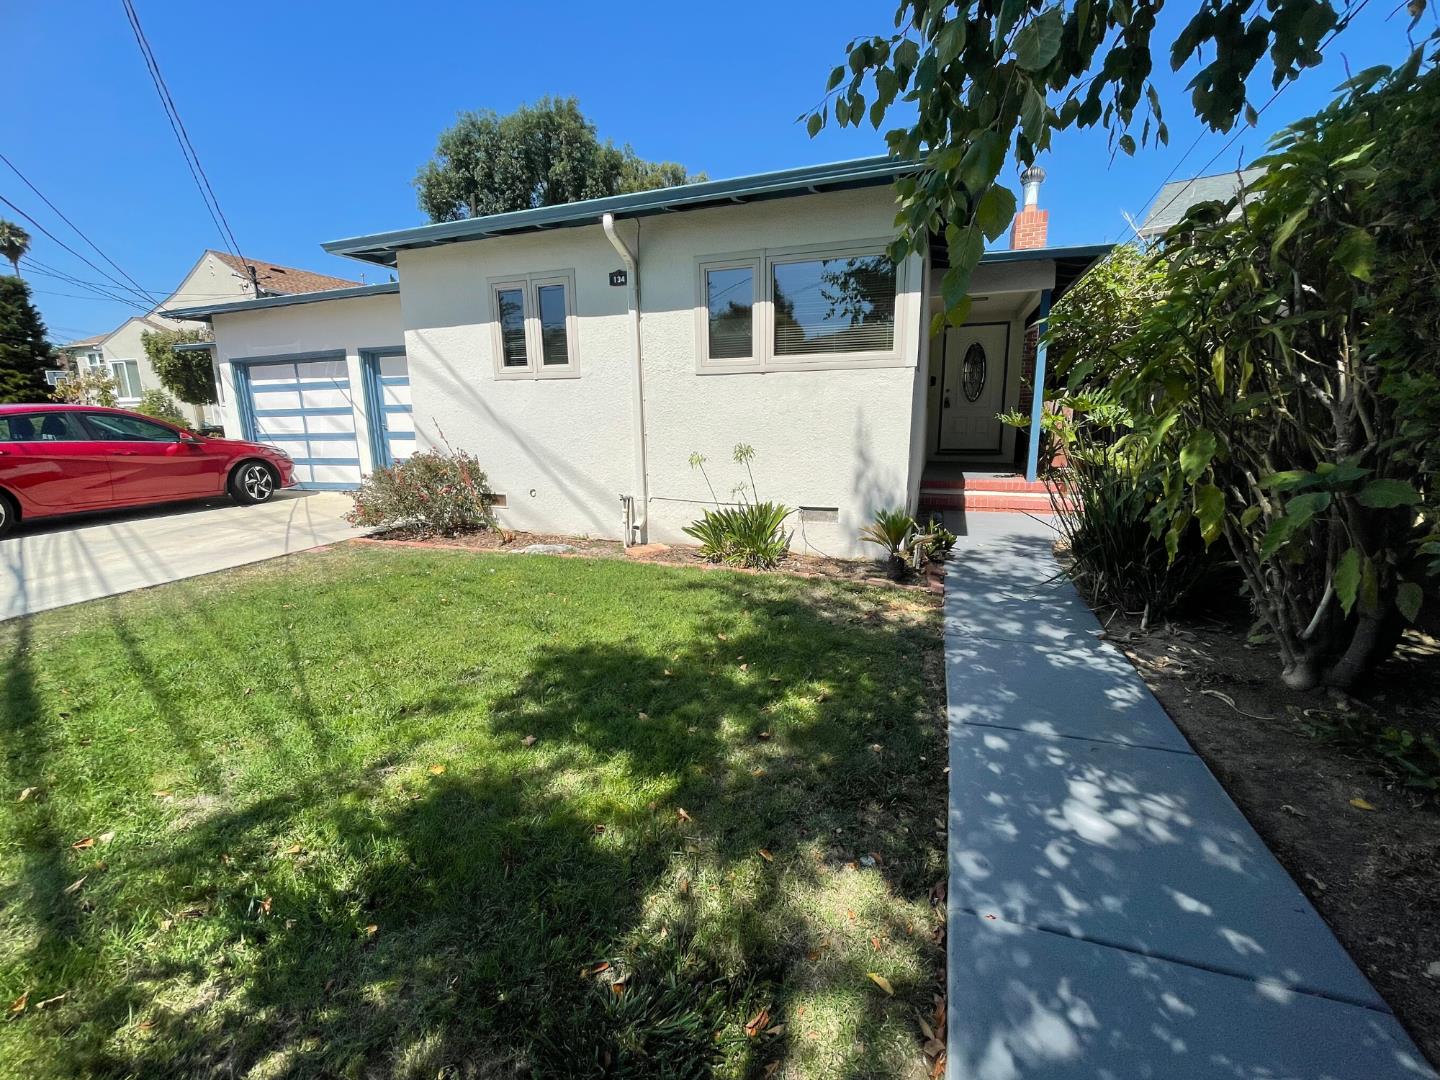 Photo of 136-/134 22nd Ave in San Mateo, CA